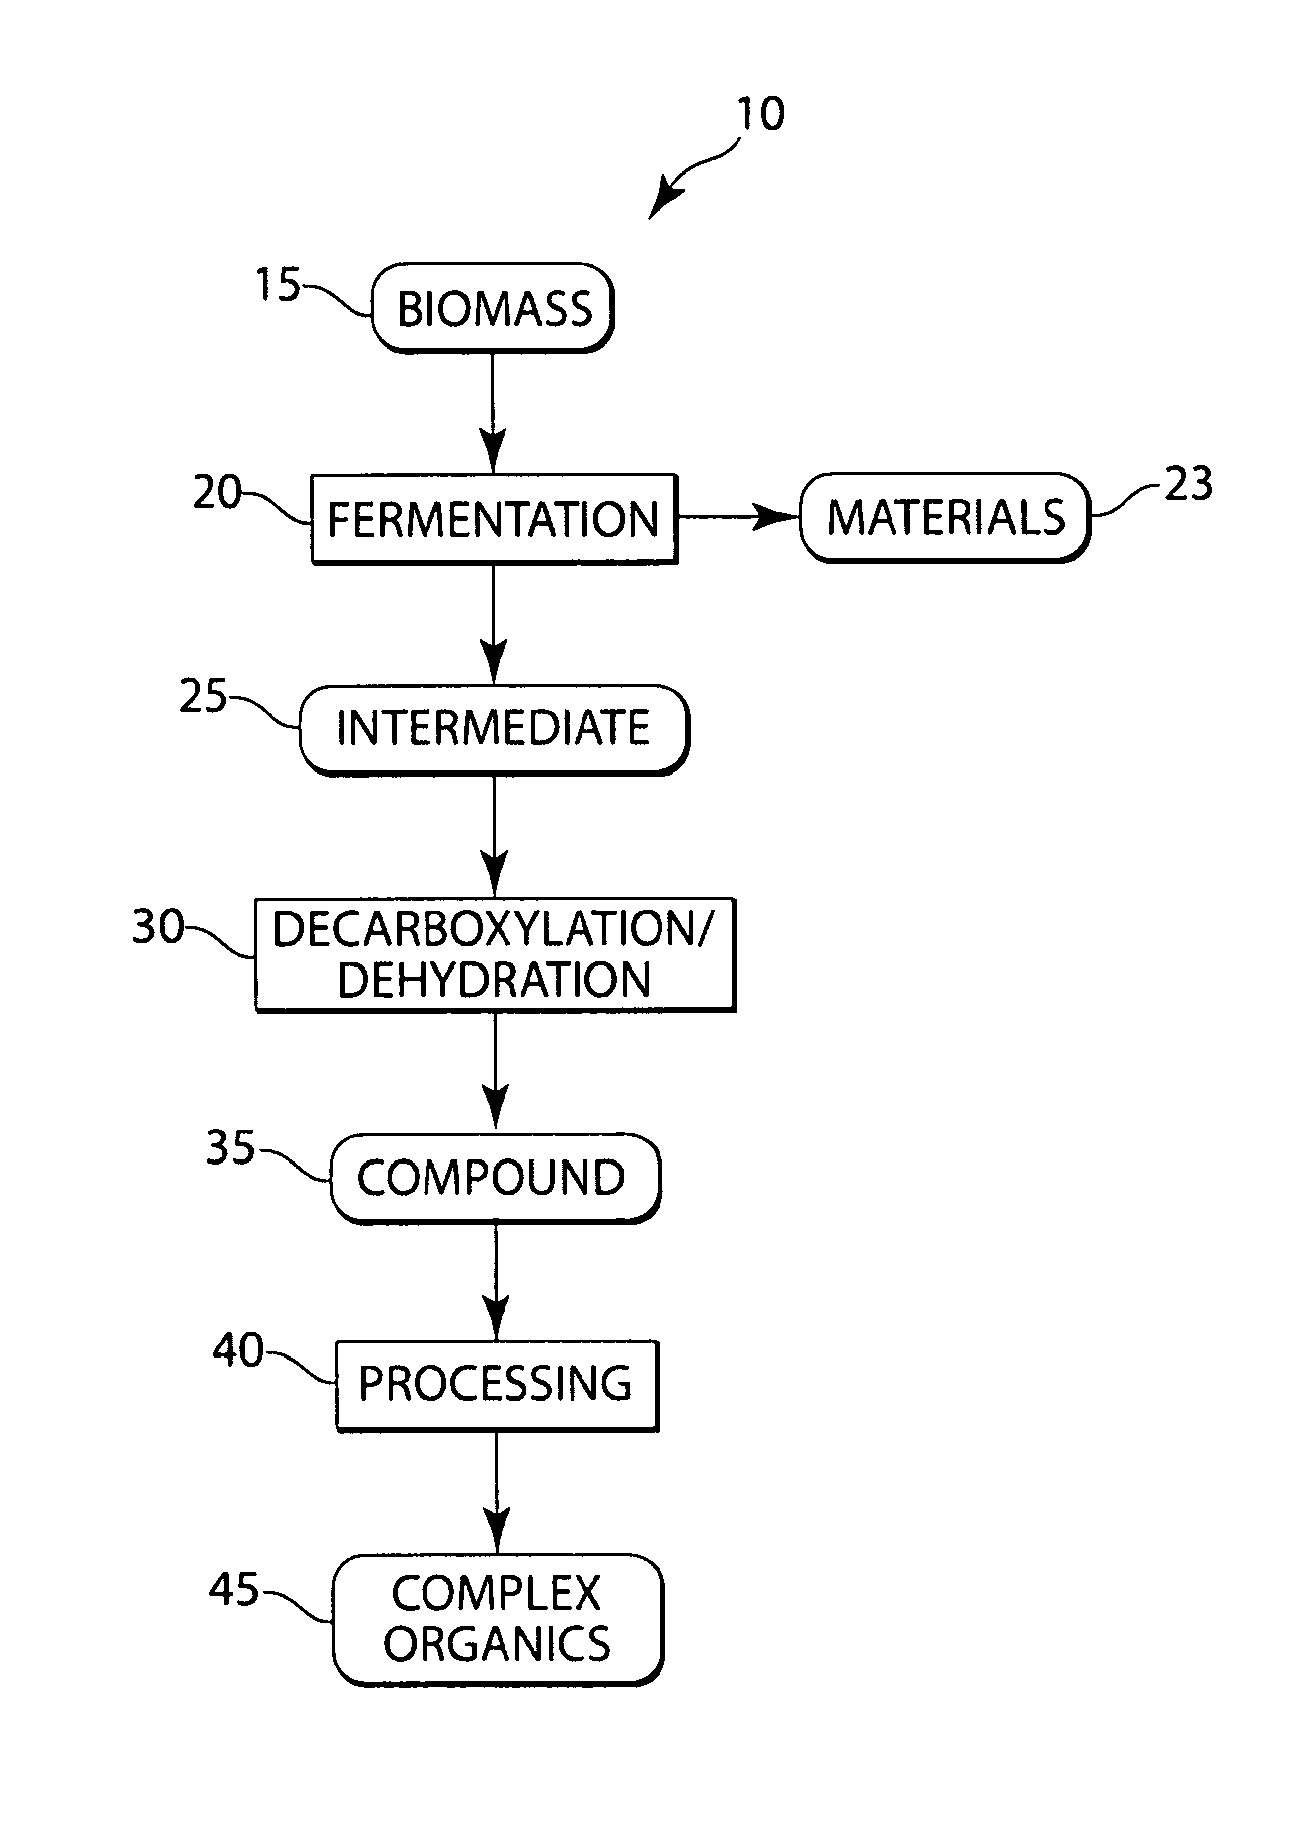 Conversion of natural products including cellulose to hydrocarbons, hydrogen and/or other related compounds